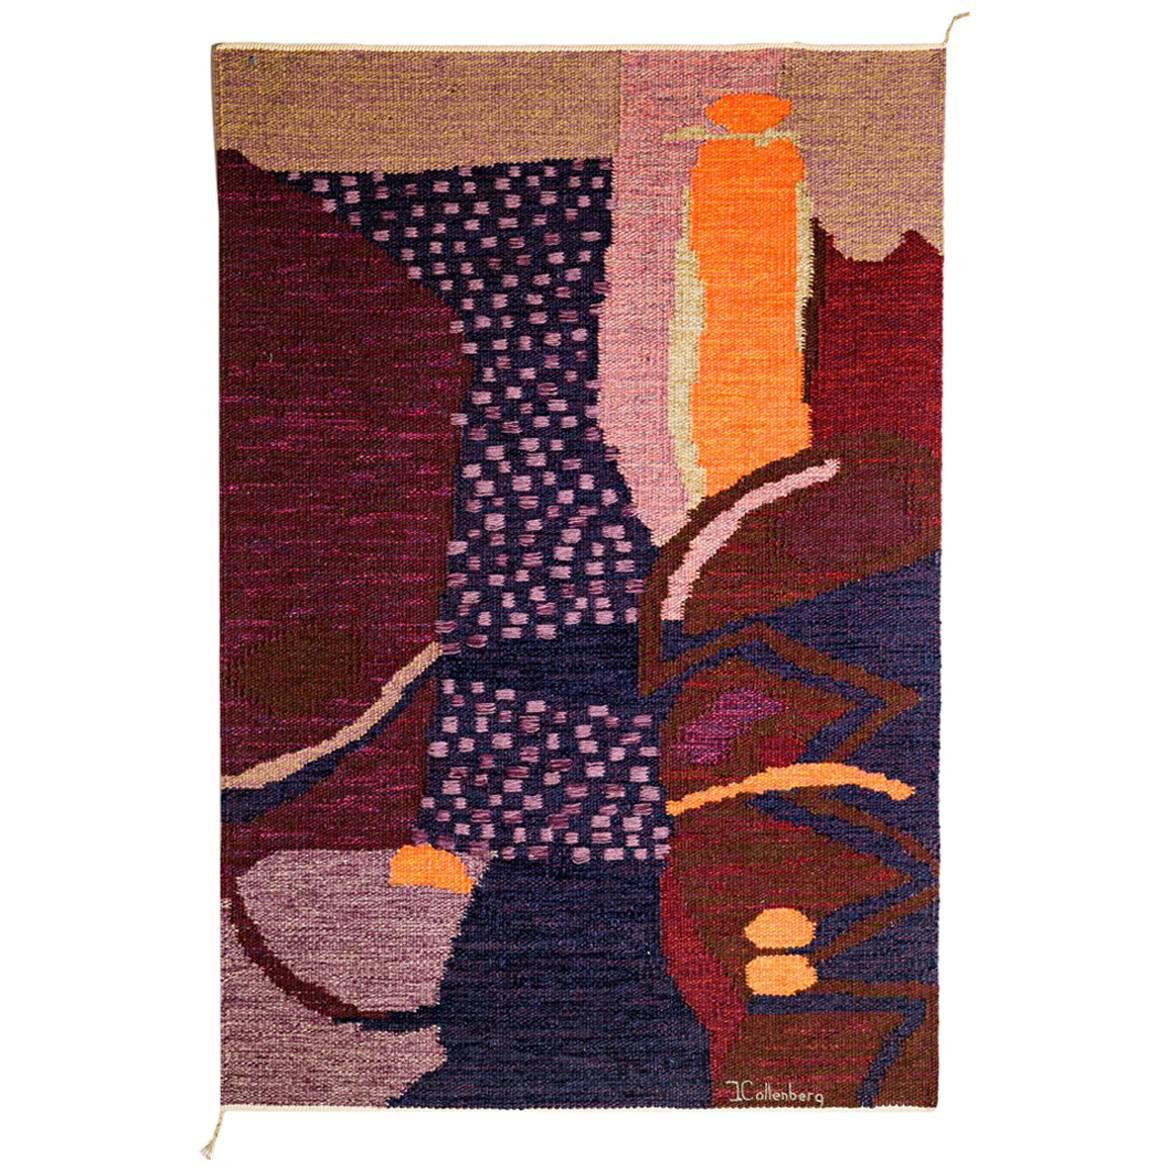 Abstract Tapestry by Ingemar Callenberg, circa 1950